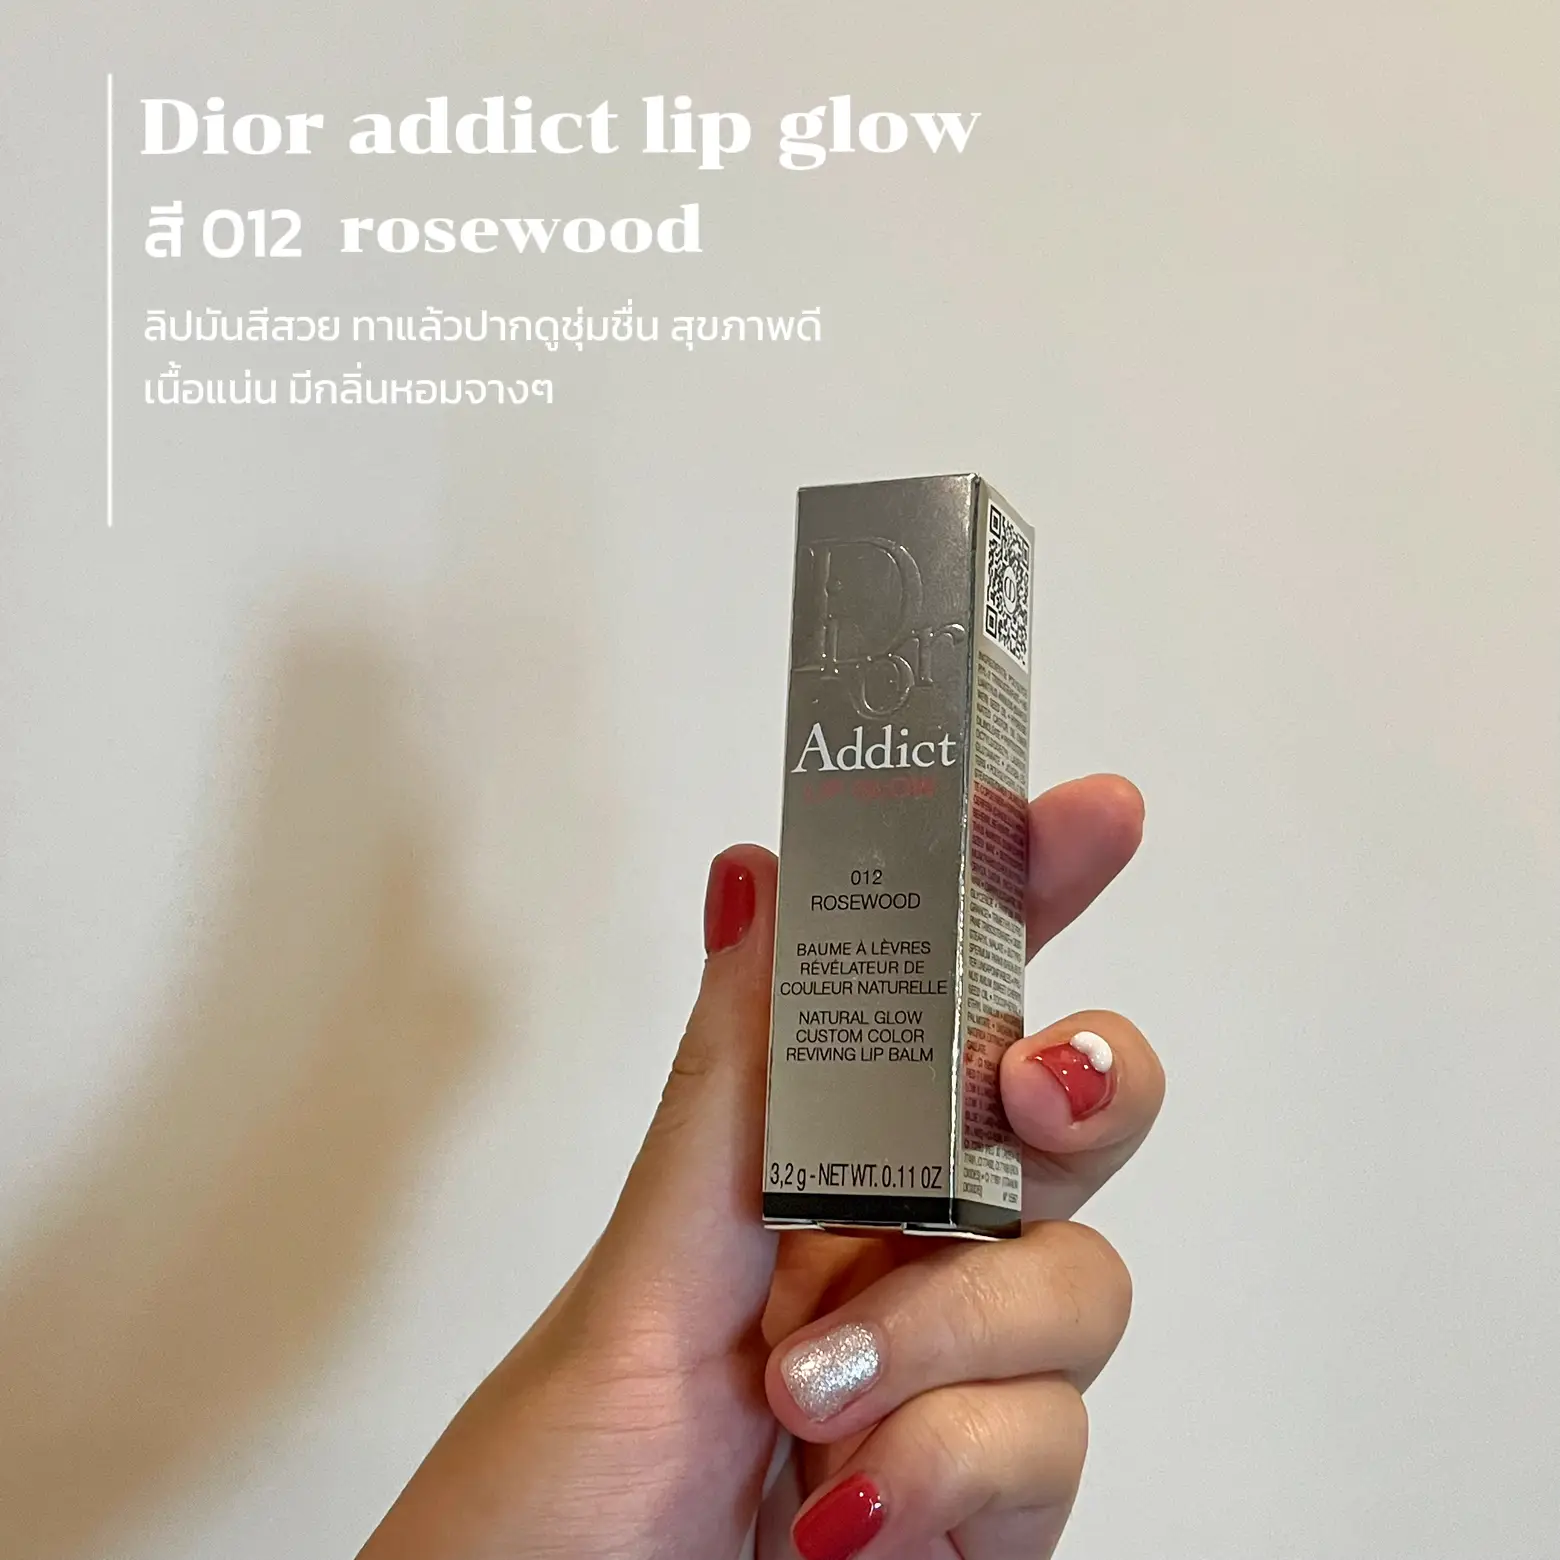 rosewood review glow | posted lip Lemon8 | lip dior badboyminwa by addict 012 Gallery color